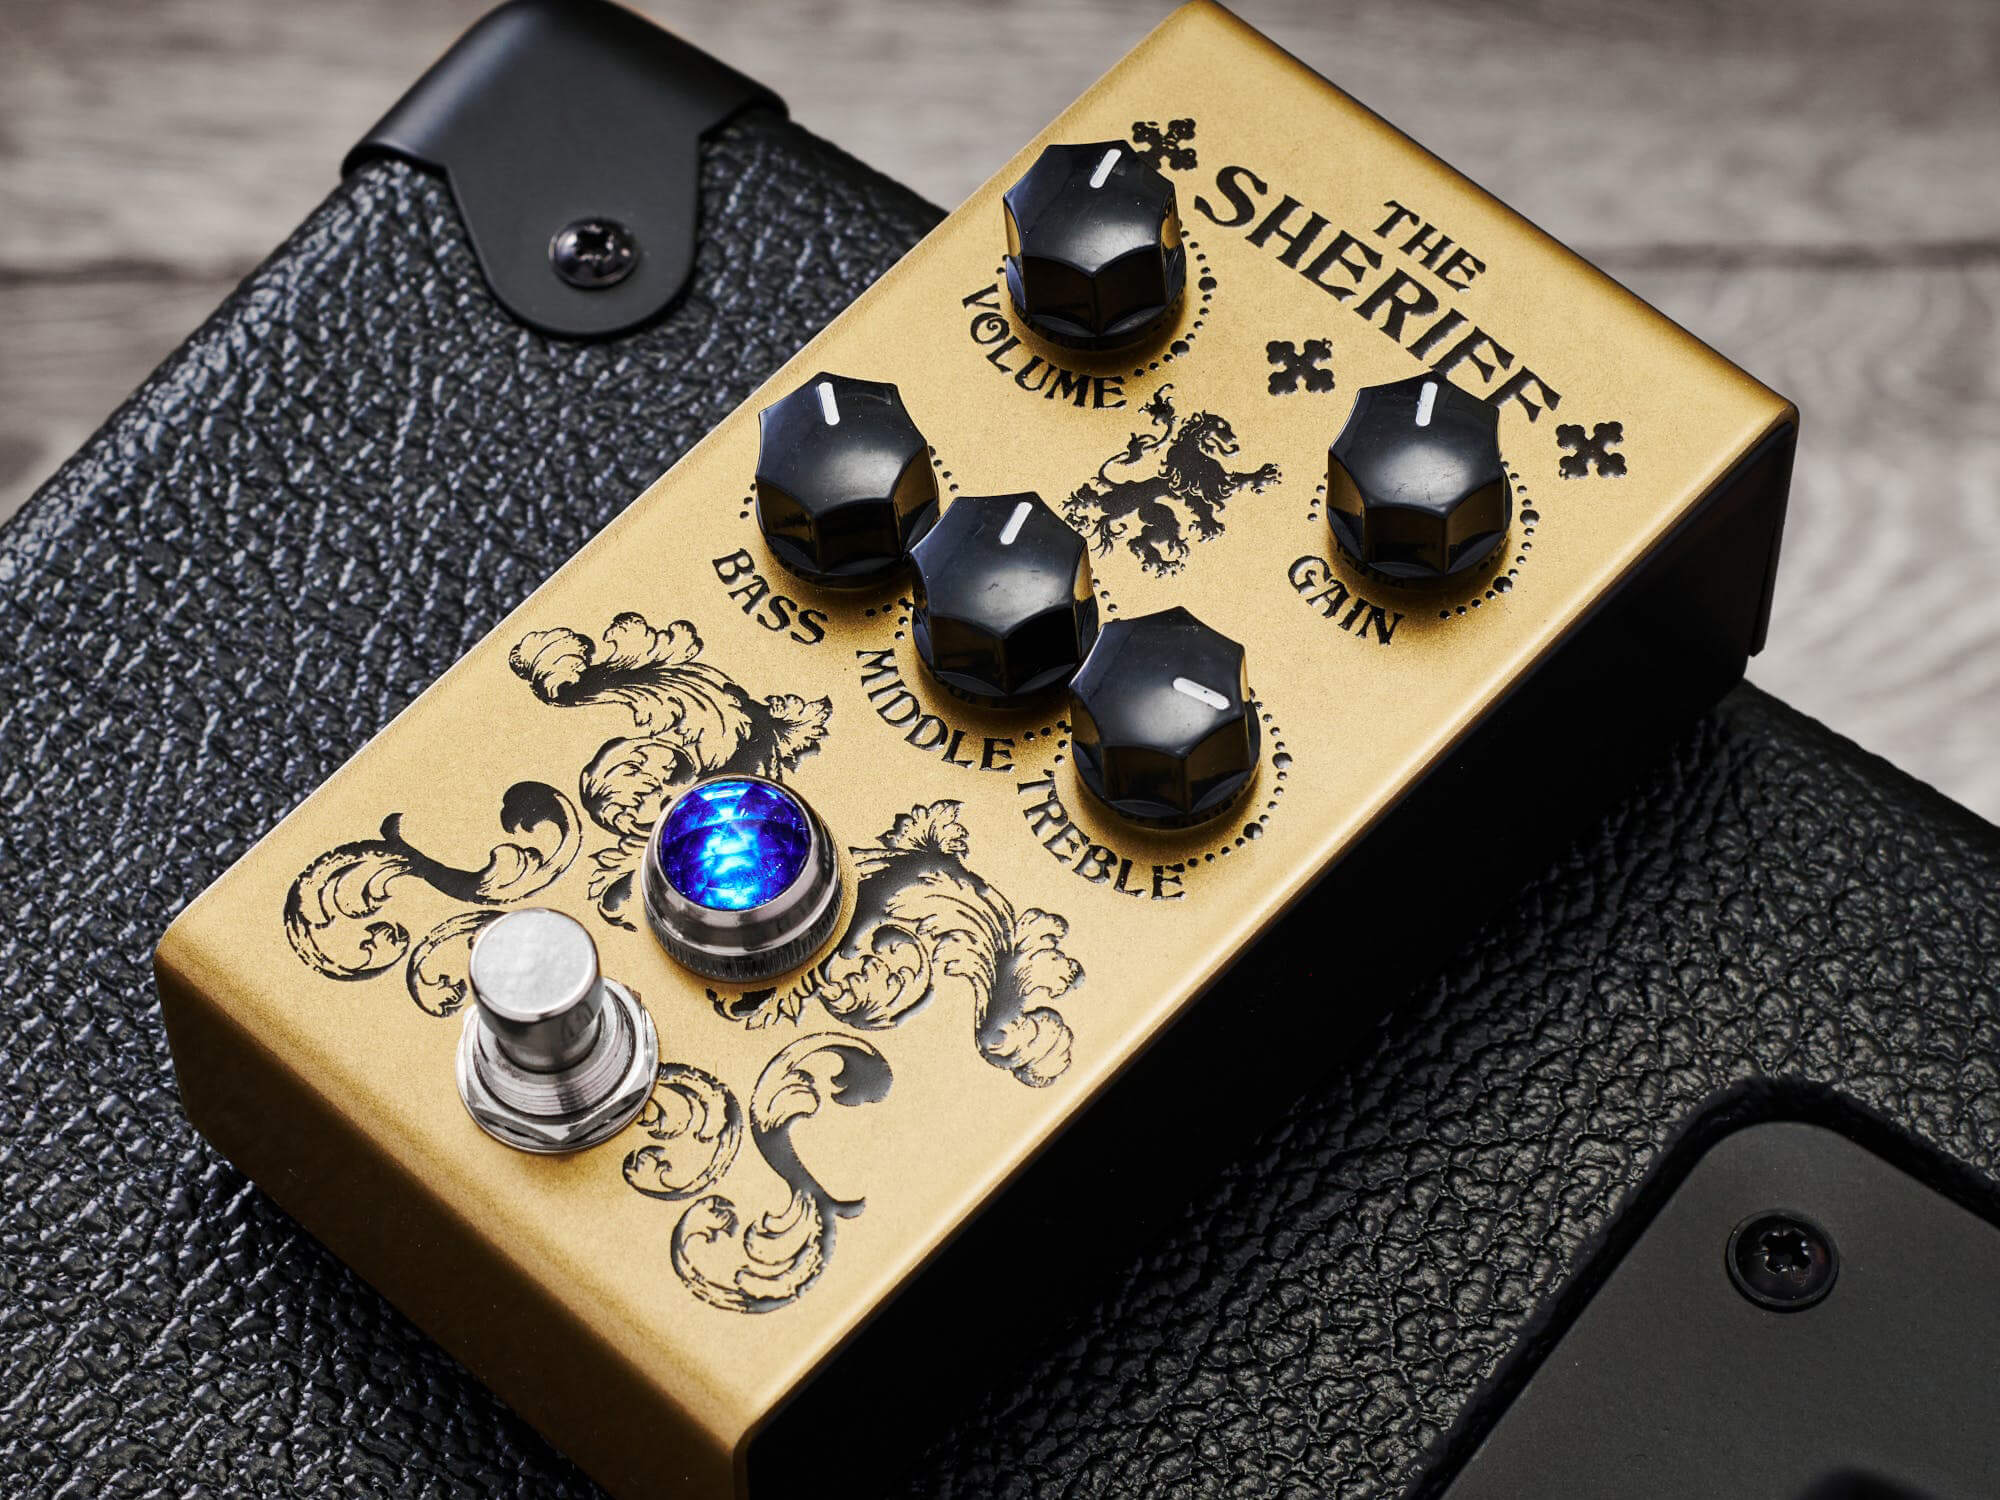 Victory Amps V1 The Sheriff Overdrive Pedal